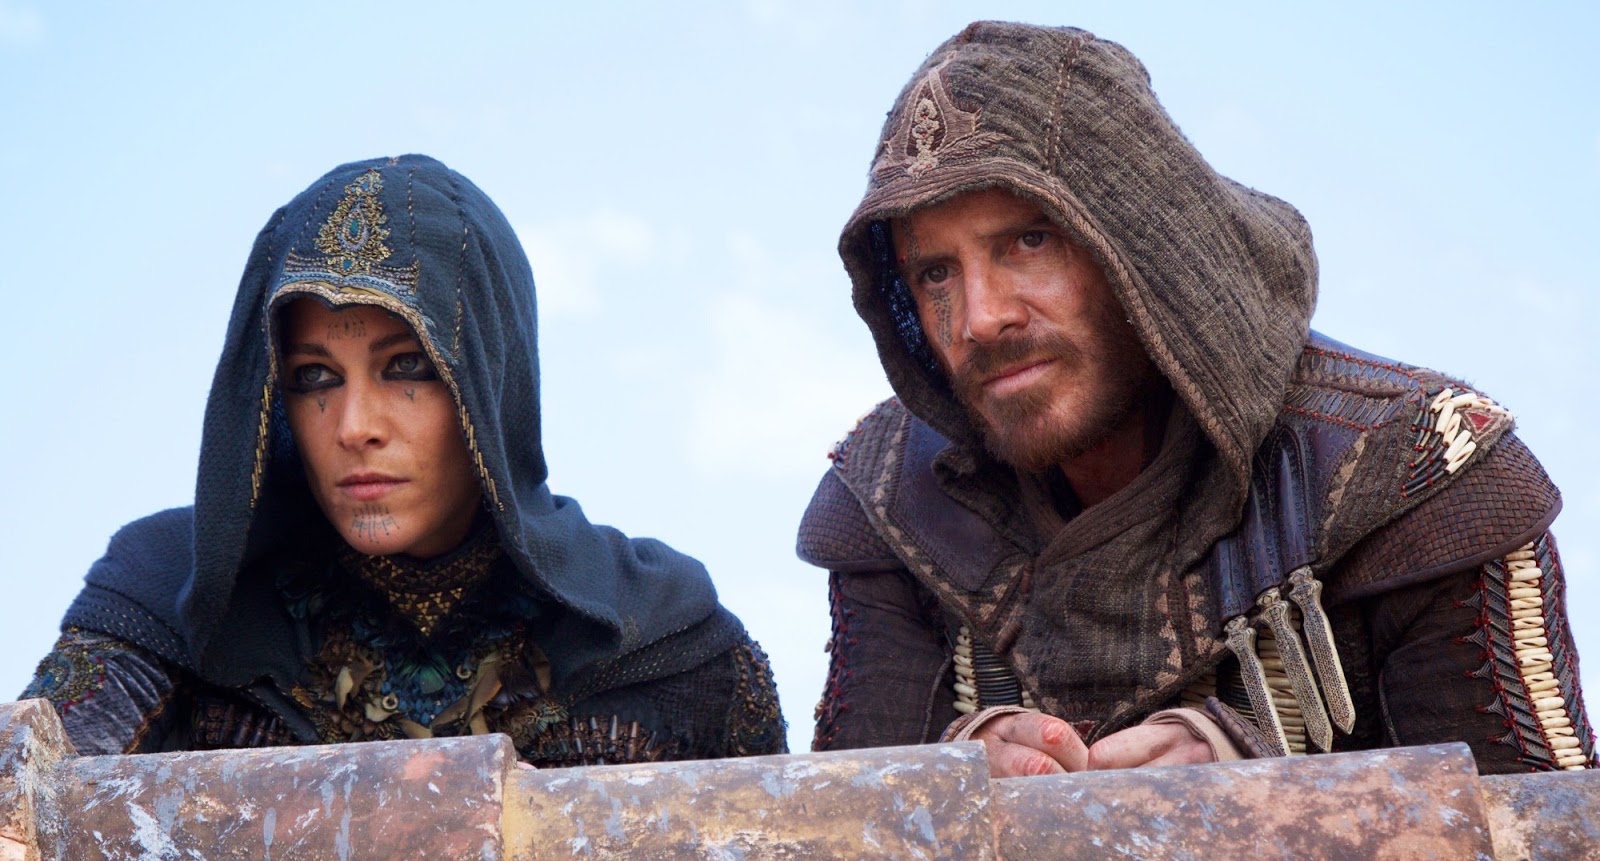 Assassin’s Creed (2016) - Michael Fassbender in this film adaptation of the videogame